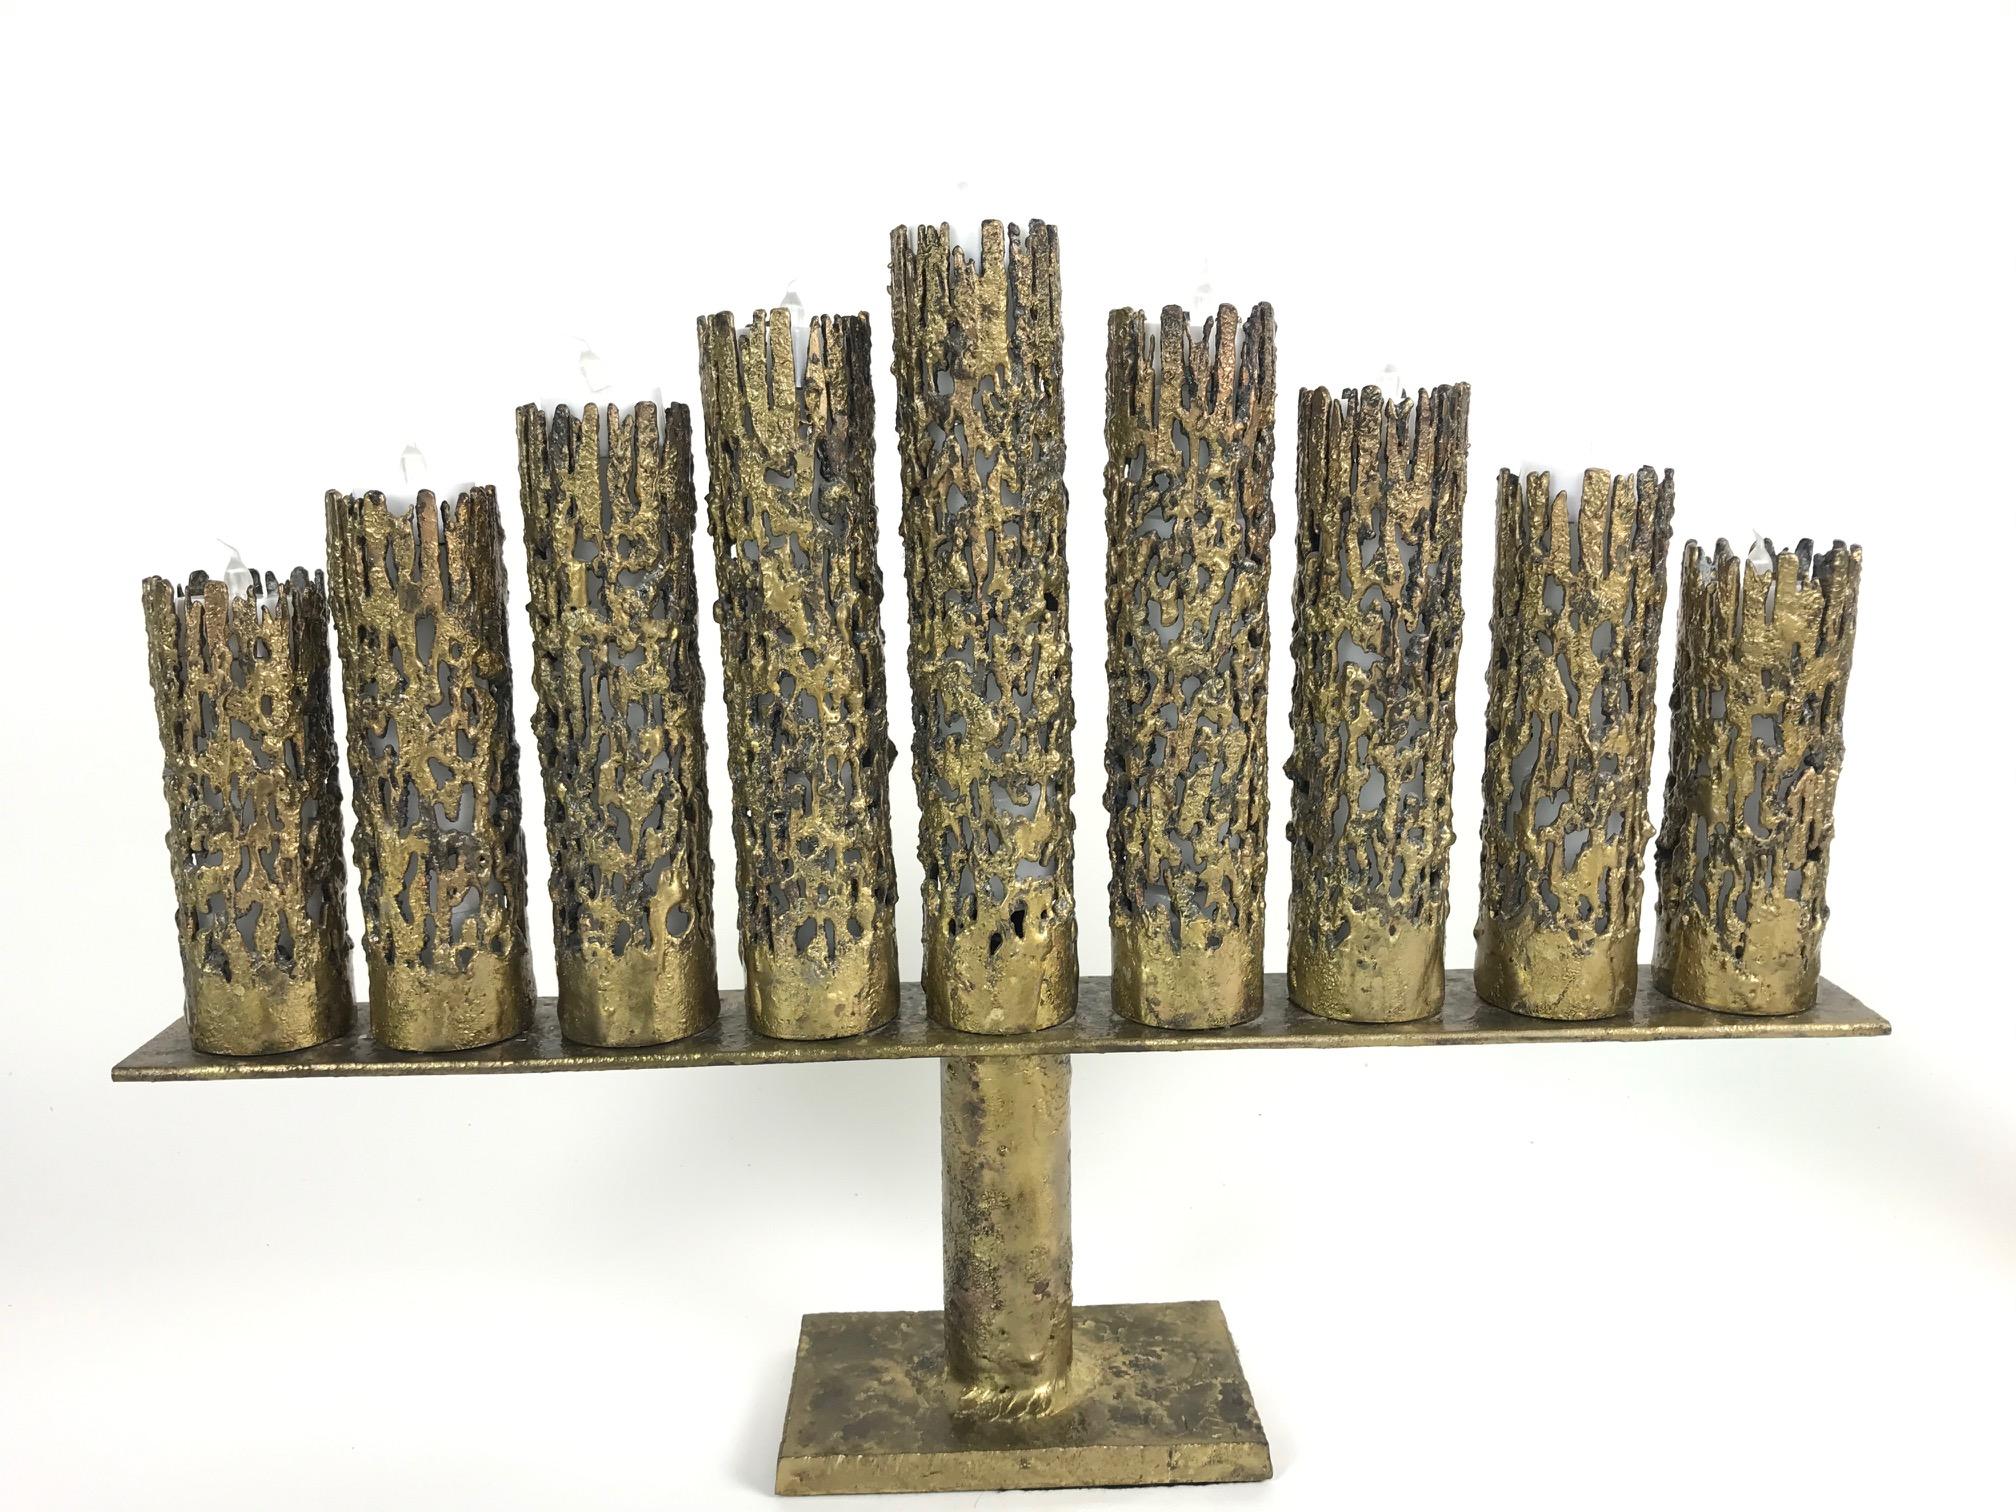 Magnificent Mid-Century Modern one-of-a-kind Brutalist style brass Studio Hanukah Menorah makes a dramatic statement. Artist mark on the bottom: JG, measures 12 inches H x 22.25 inches W x 2.5 inches D. Sculptural in essence, made of solid brass,